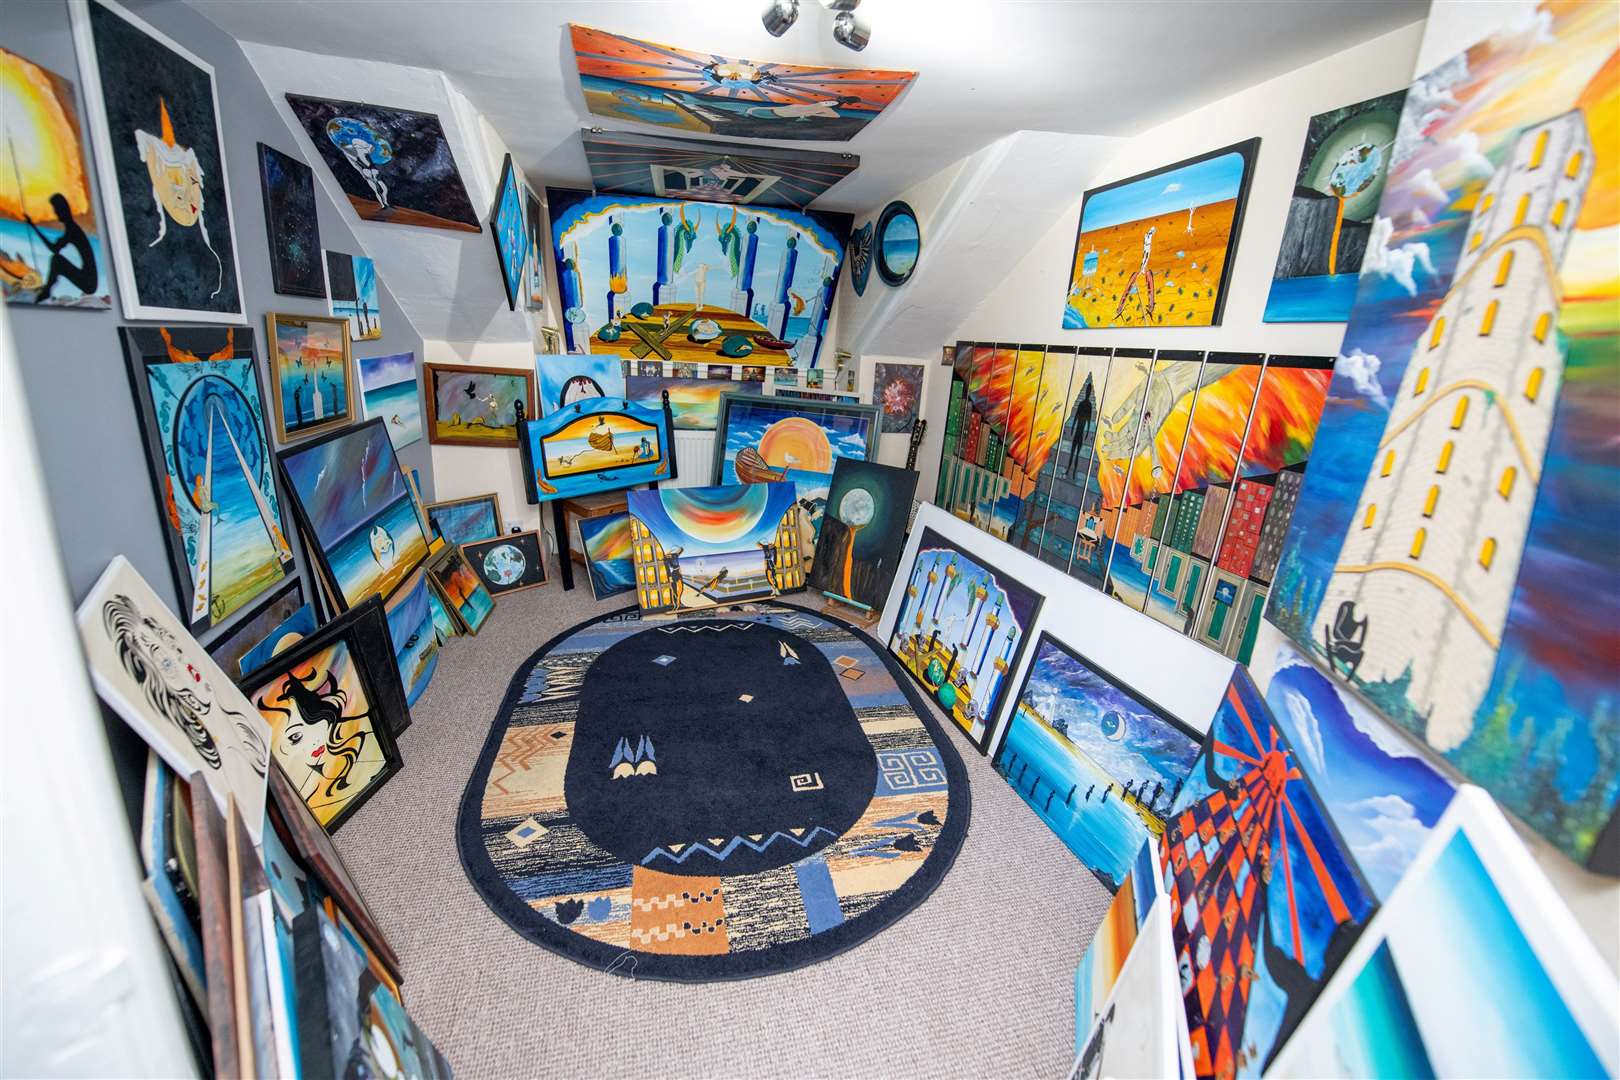 Artist Carl Stafford shows off his incredible house – a few doors down from where Van Gogh once lived. Picture: SWNS